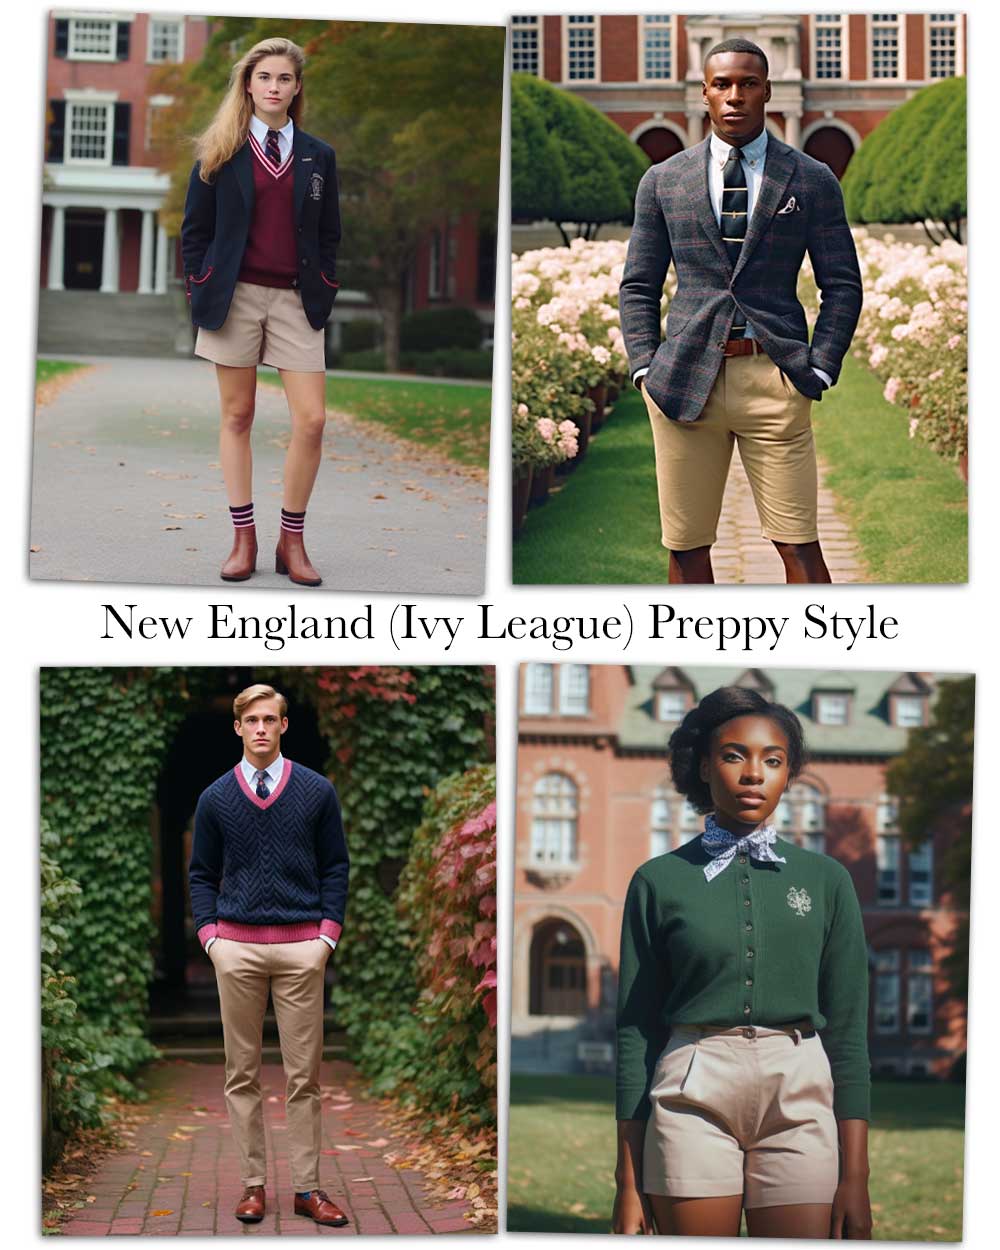 New England Ivy League dressing style